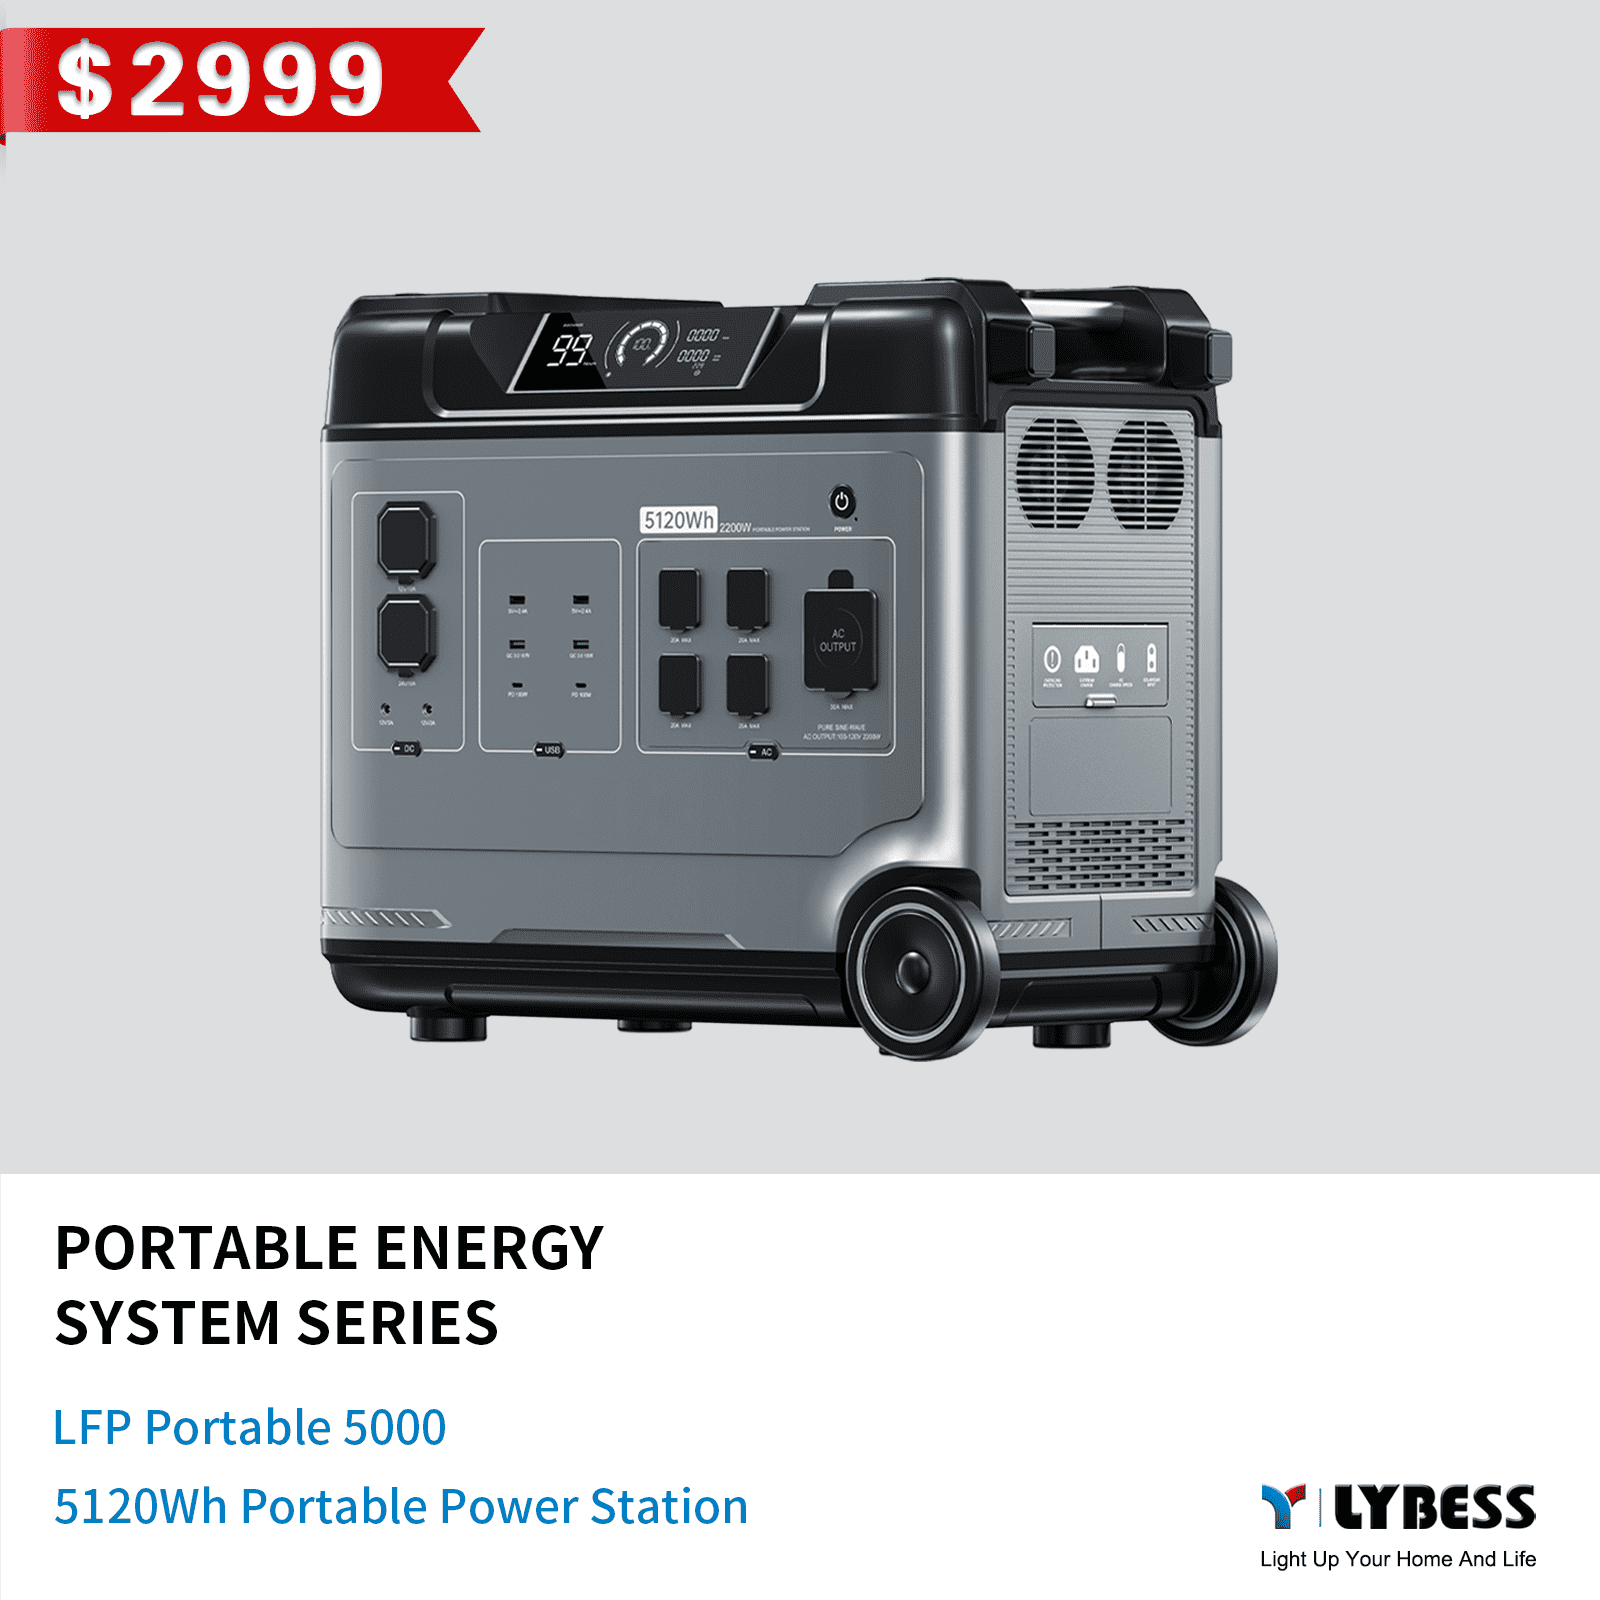 5120Wh Portable Power Station